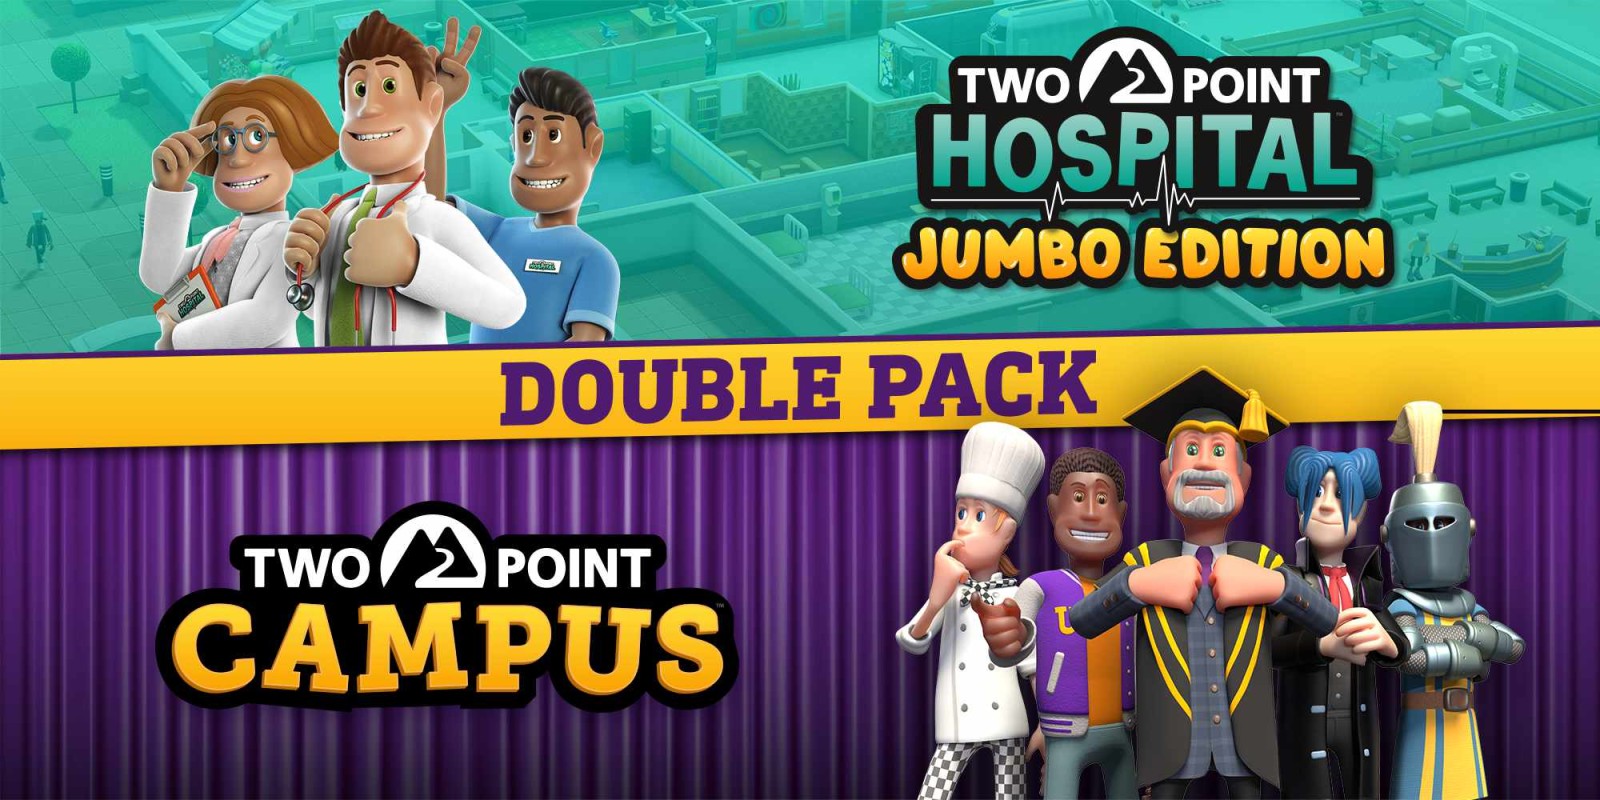 Two Point Hospital and Two Point Campus Double Pack | Nintendo Switch  download software | Games | Nintendo